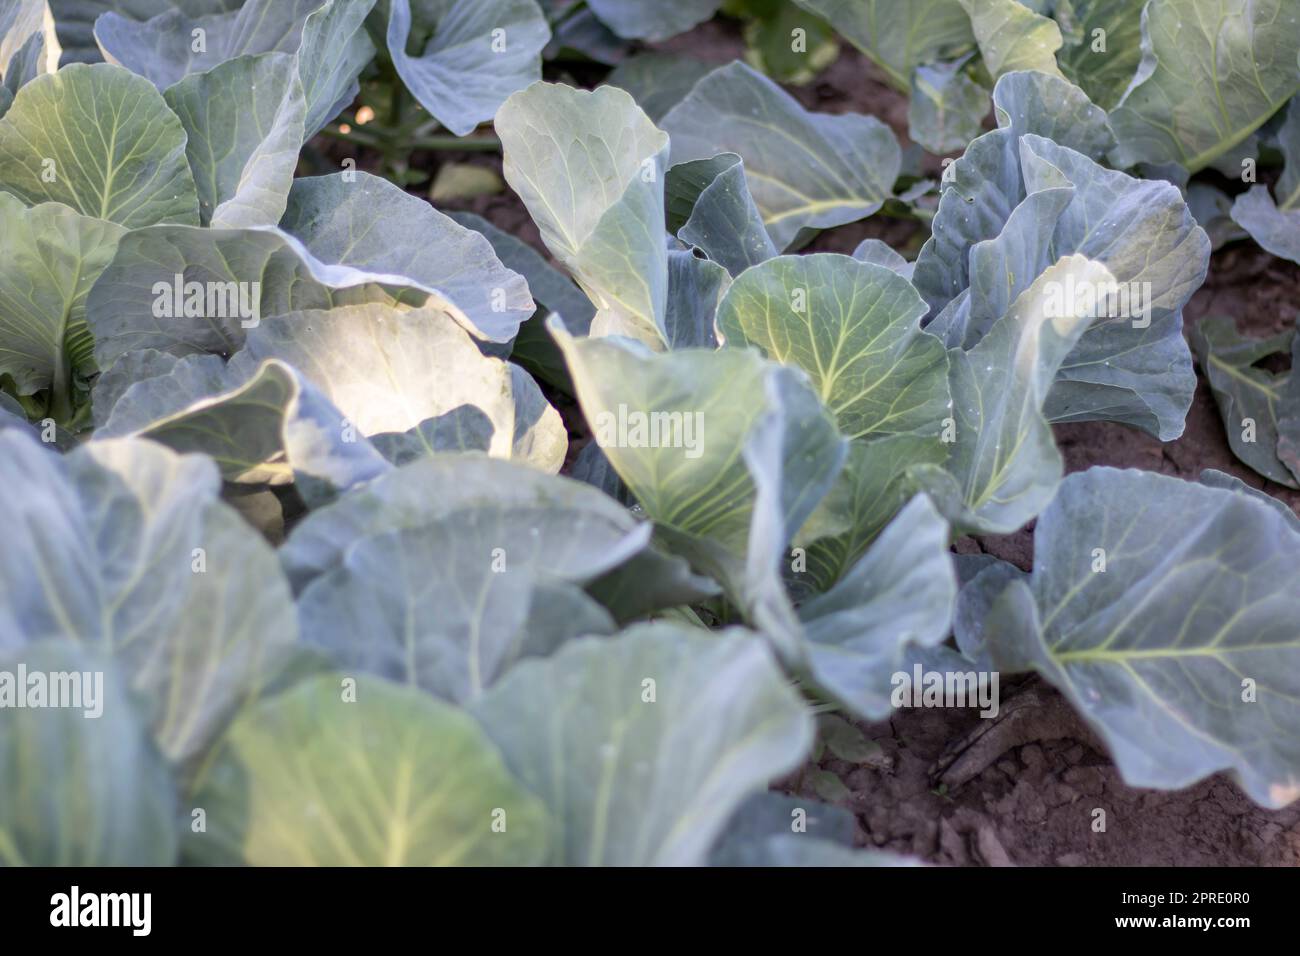 White fresh cabbage Aggressor grows in the beds. Close-up shot. Cabbage with spreading leaves ripens in the garden. Cultivation of cabbage. Cabbage hybrid for fresh use. Stock Photo